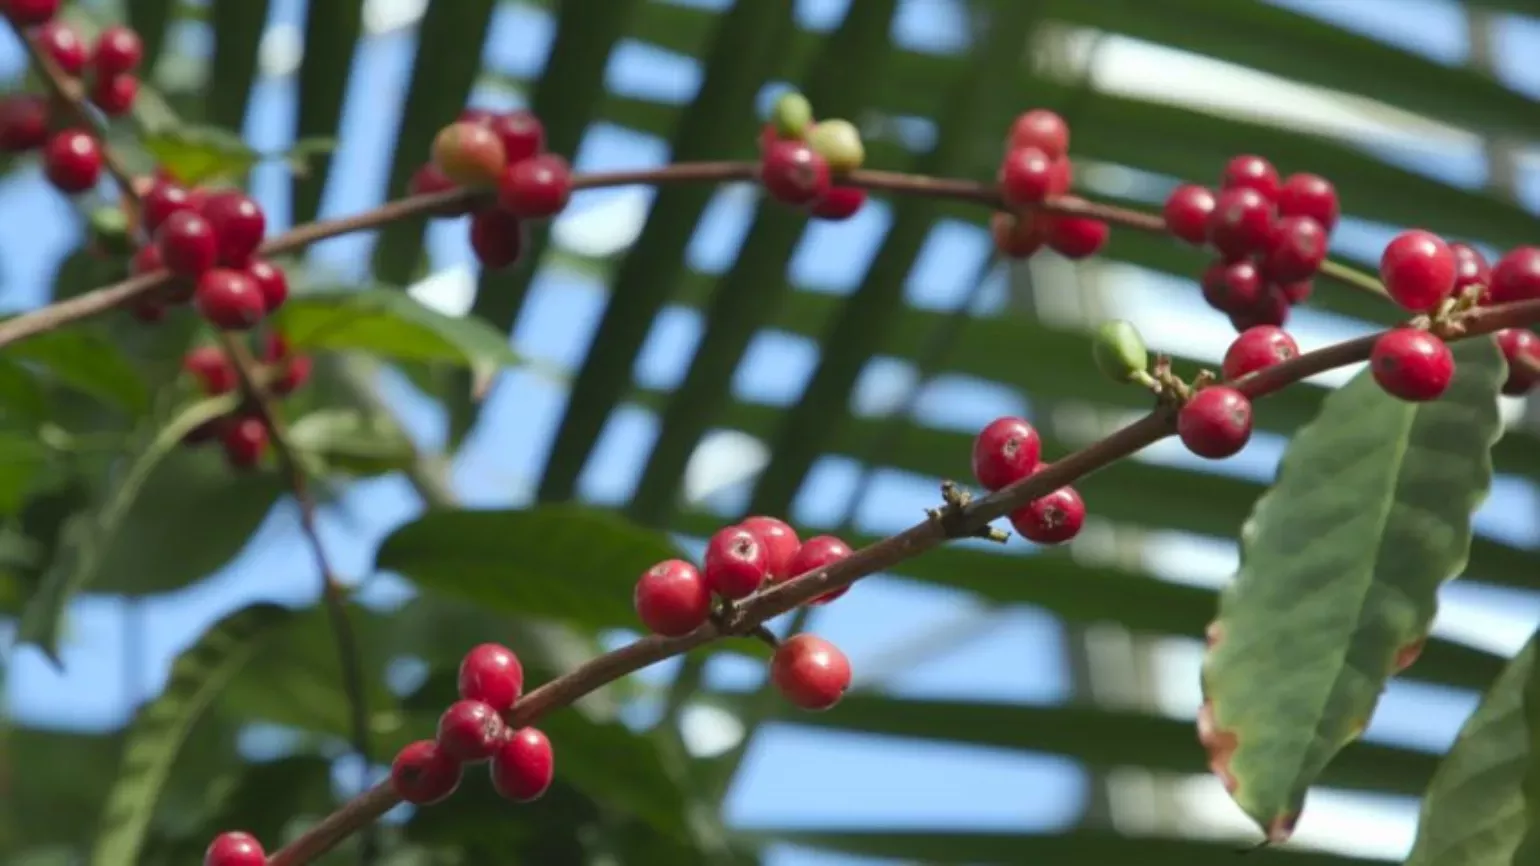 Bright red, rounded berries of arabica coffee